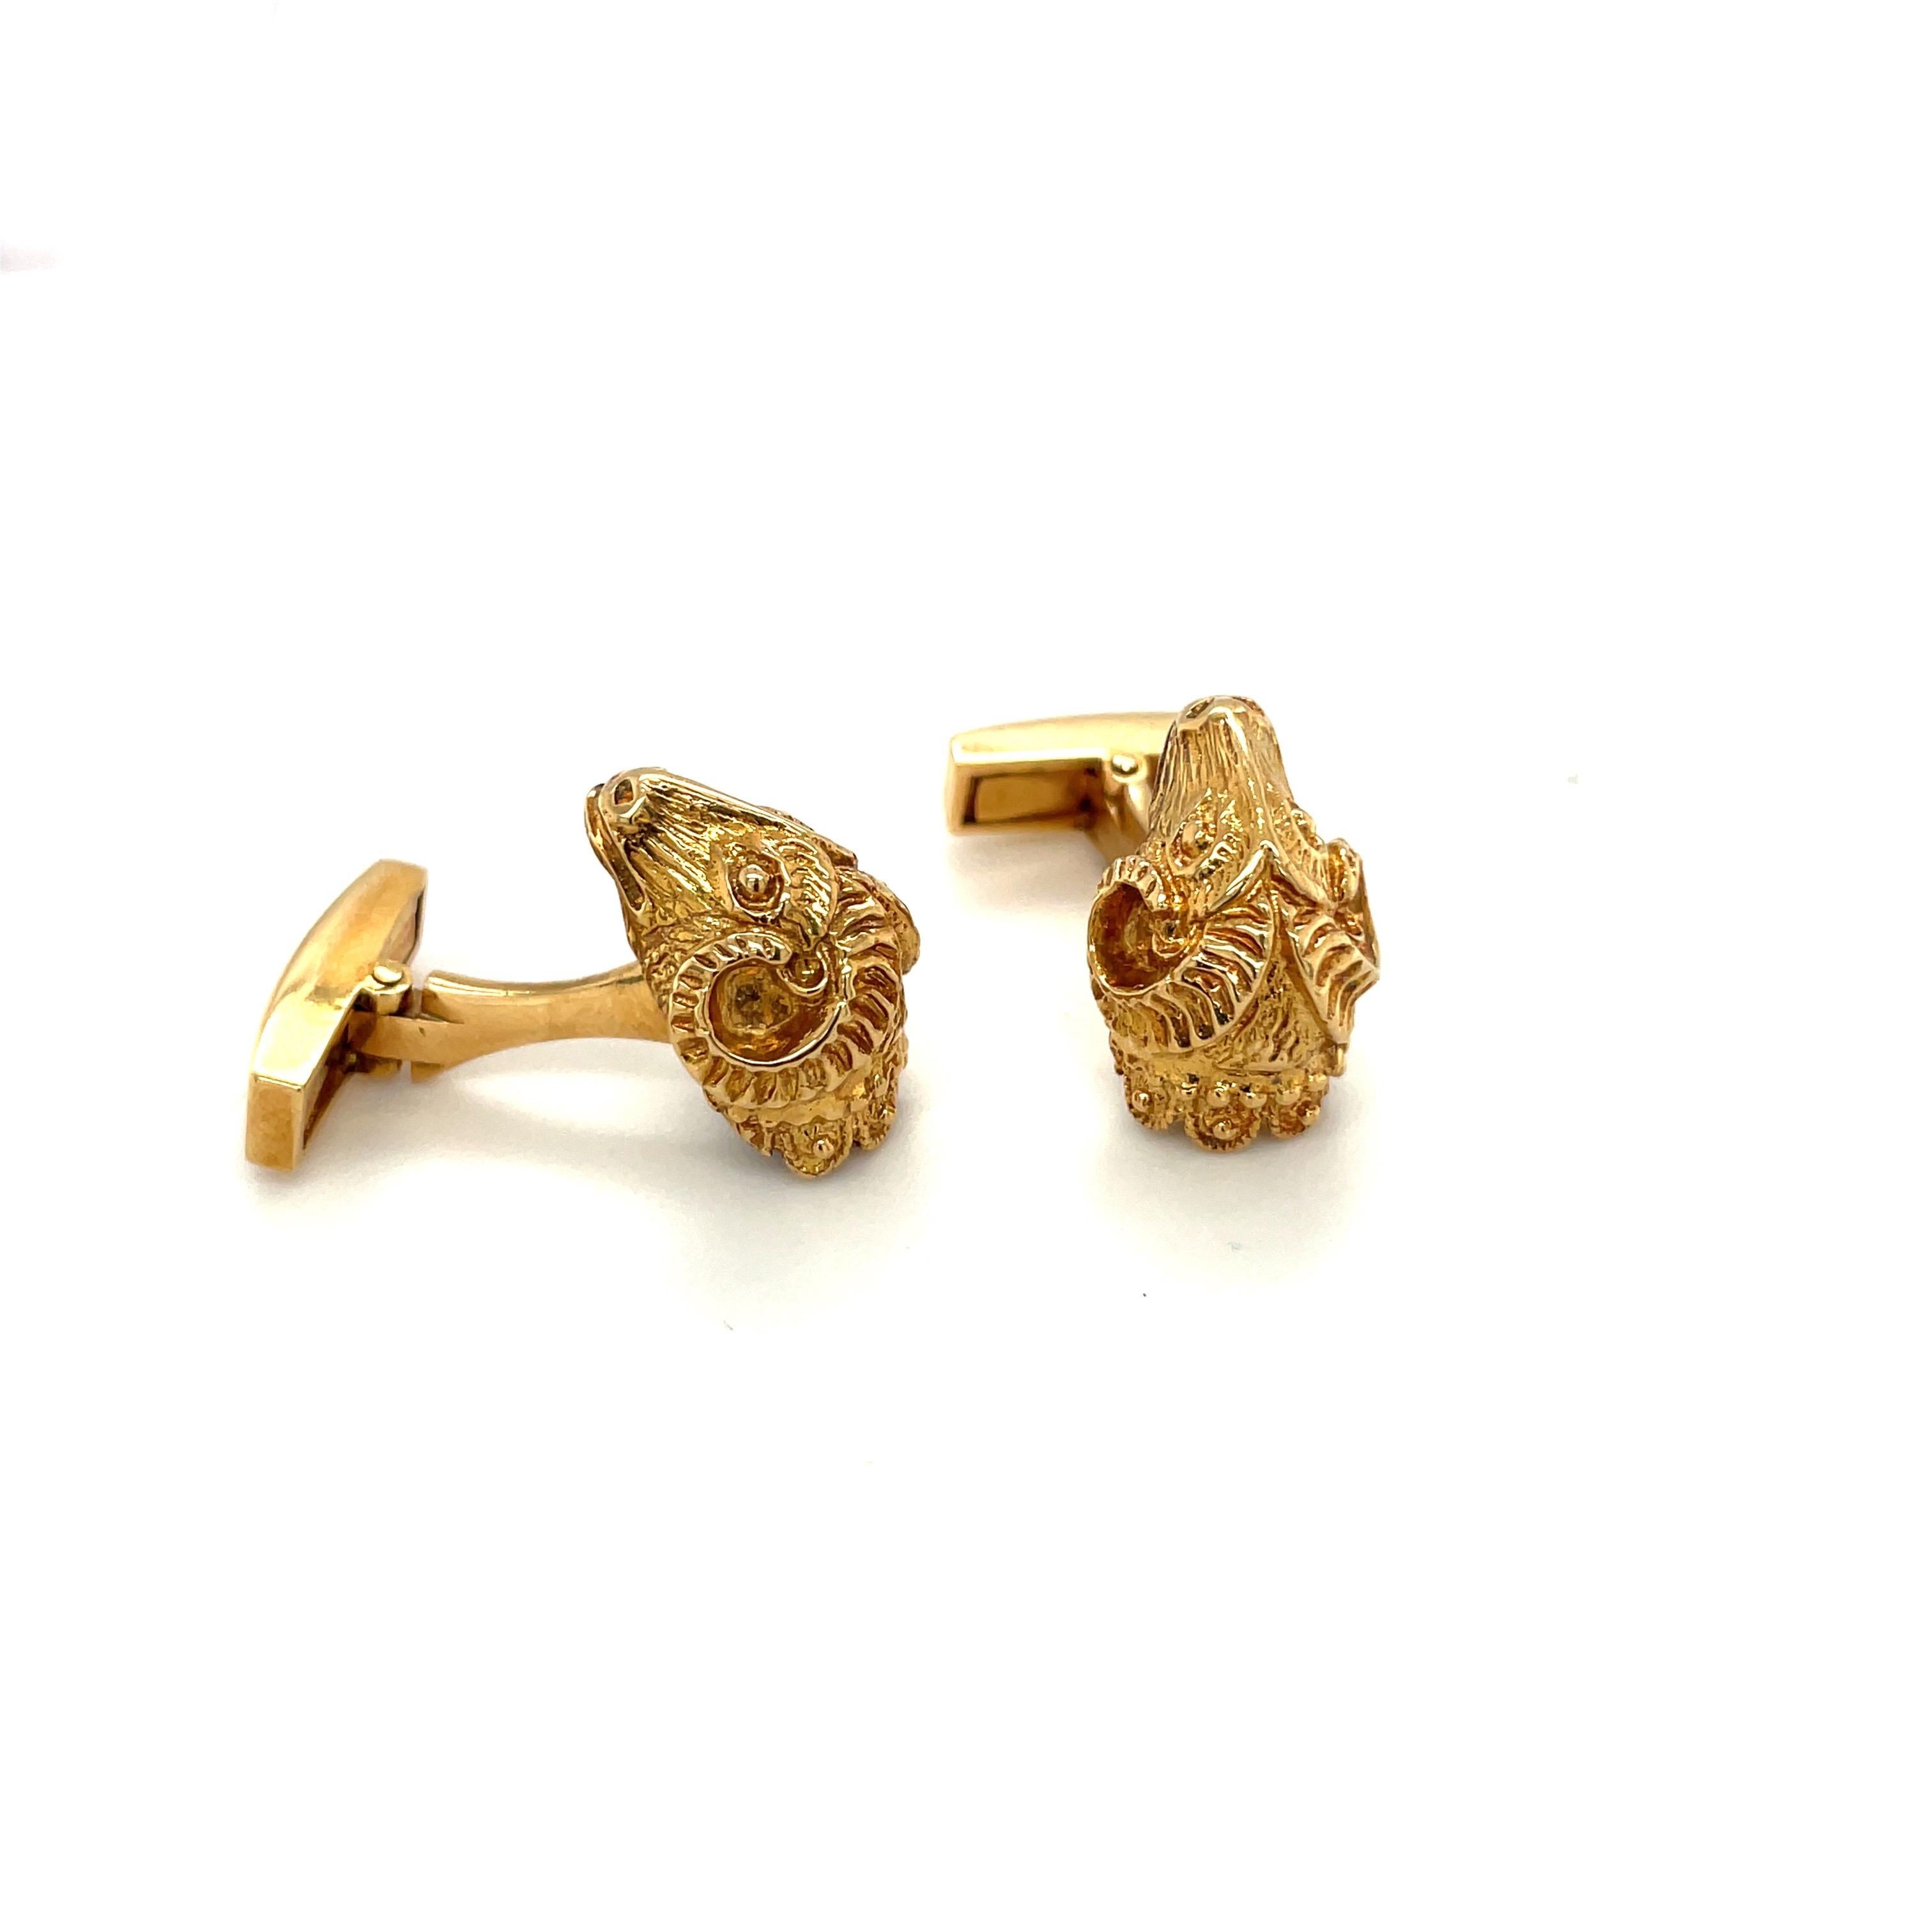 18 karat yellow gold ram's head cuff links. These cuff links are designed by Zolotas of Athens , Greece. Founded in 1895 the company merges Greek heritage with modern style to create these timeless pieces. 
Stamped  Zolotas 18K 750 